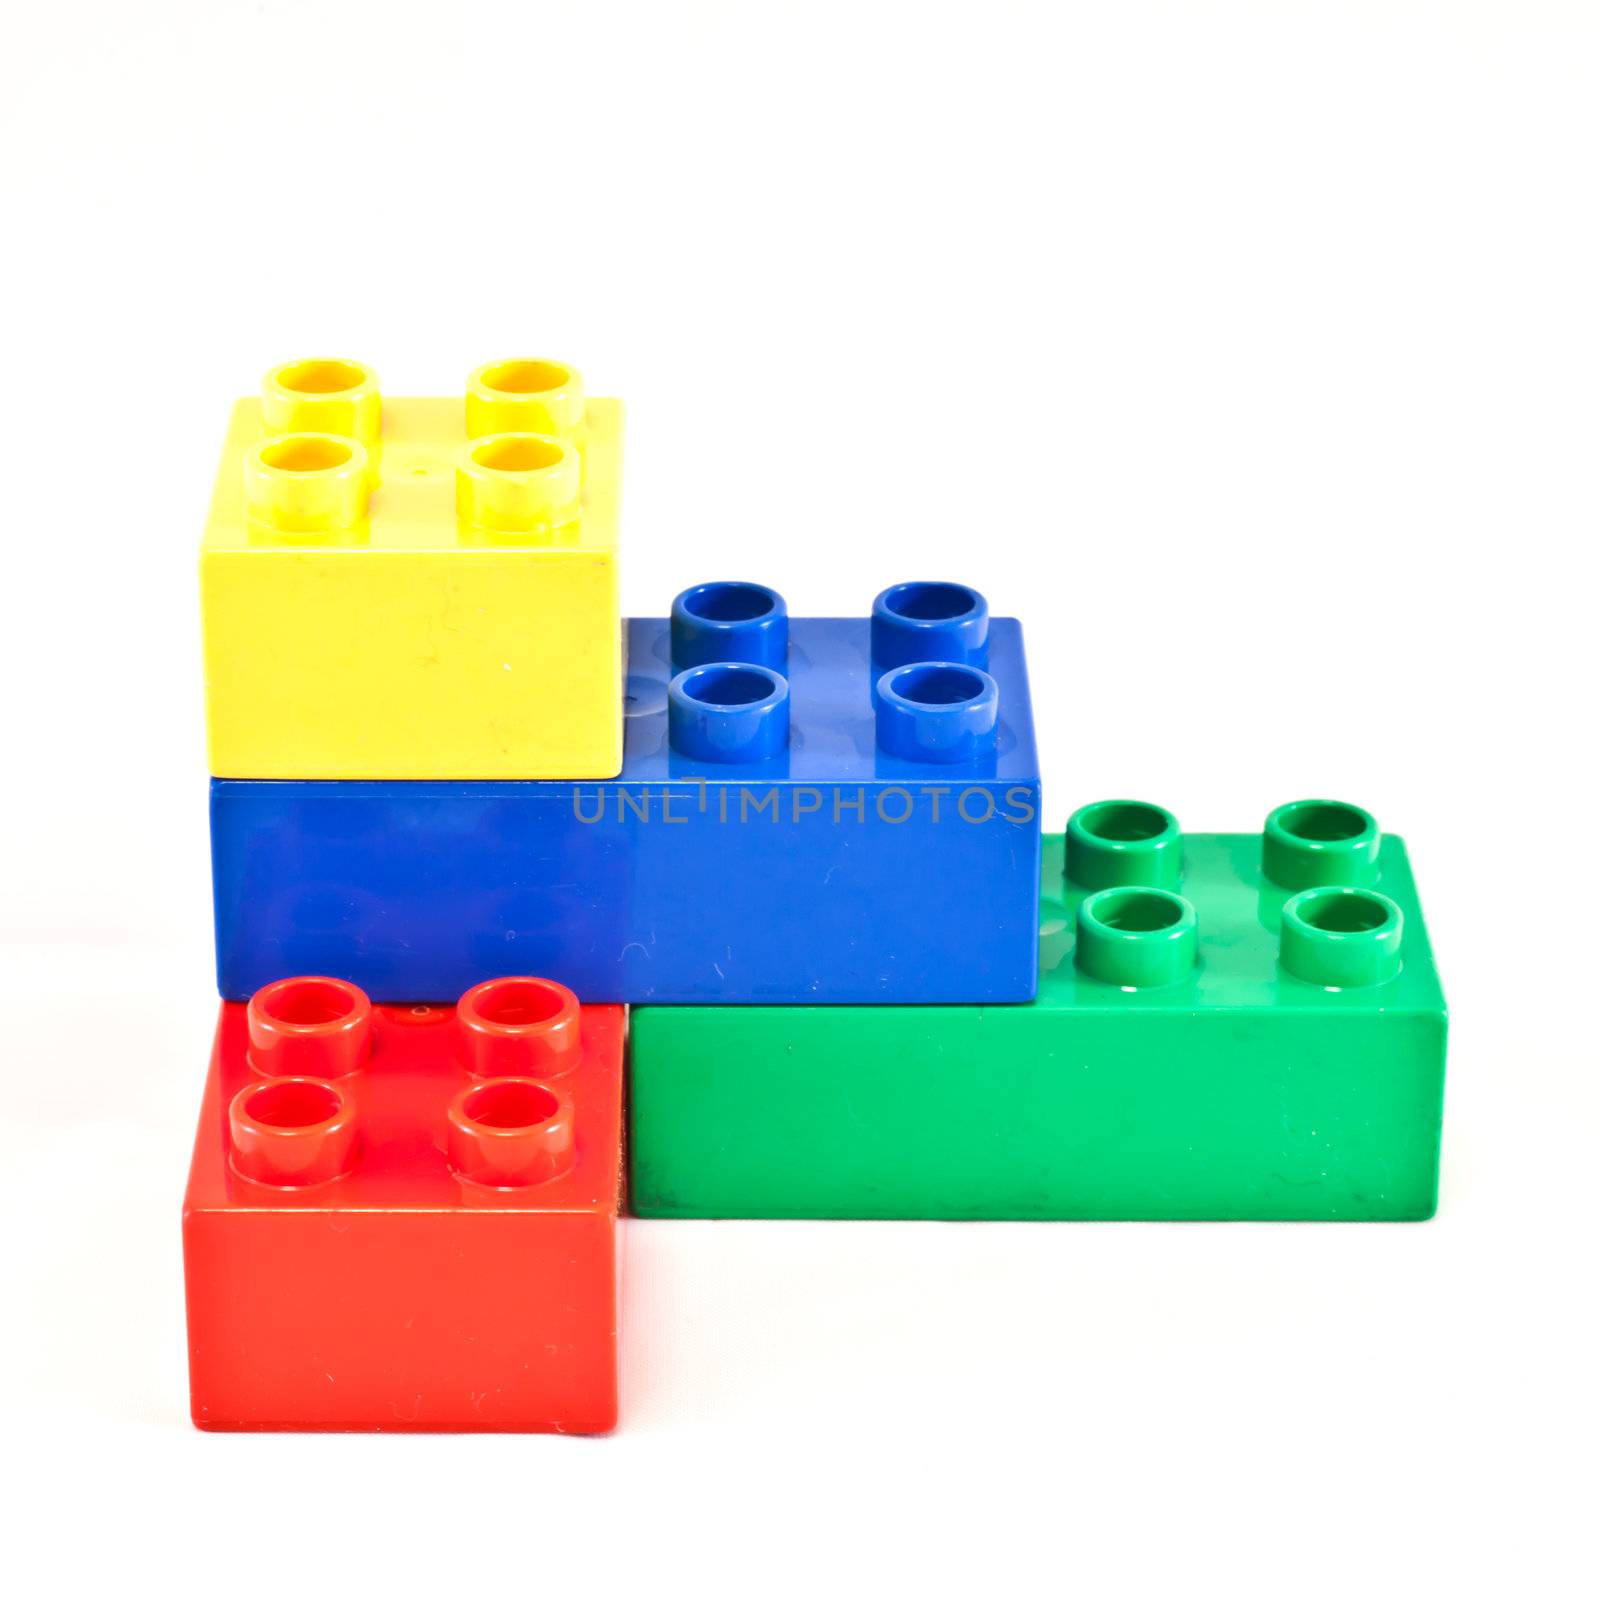 Plastic building blocks on white background. Bright colors.